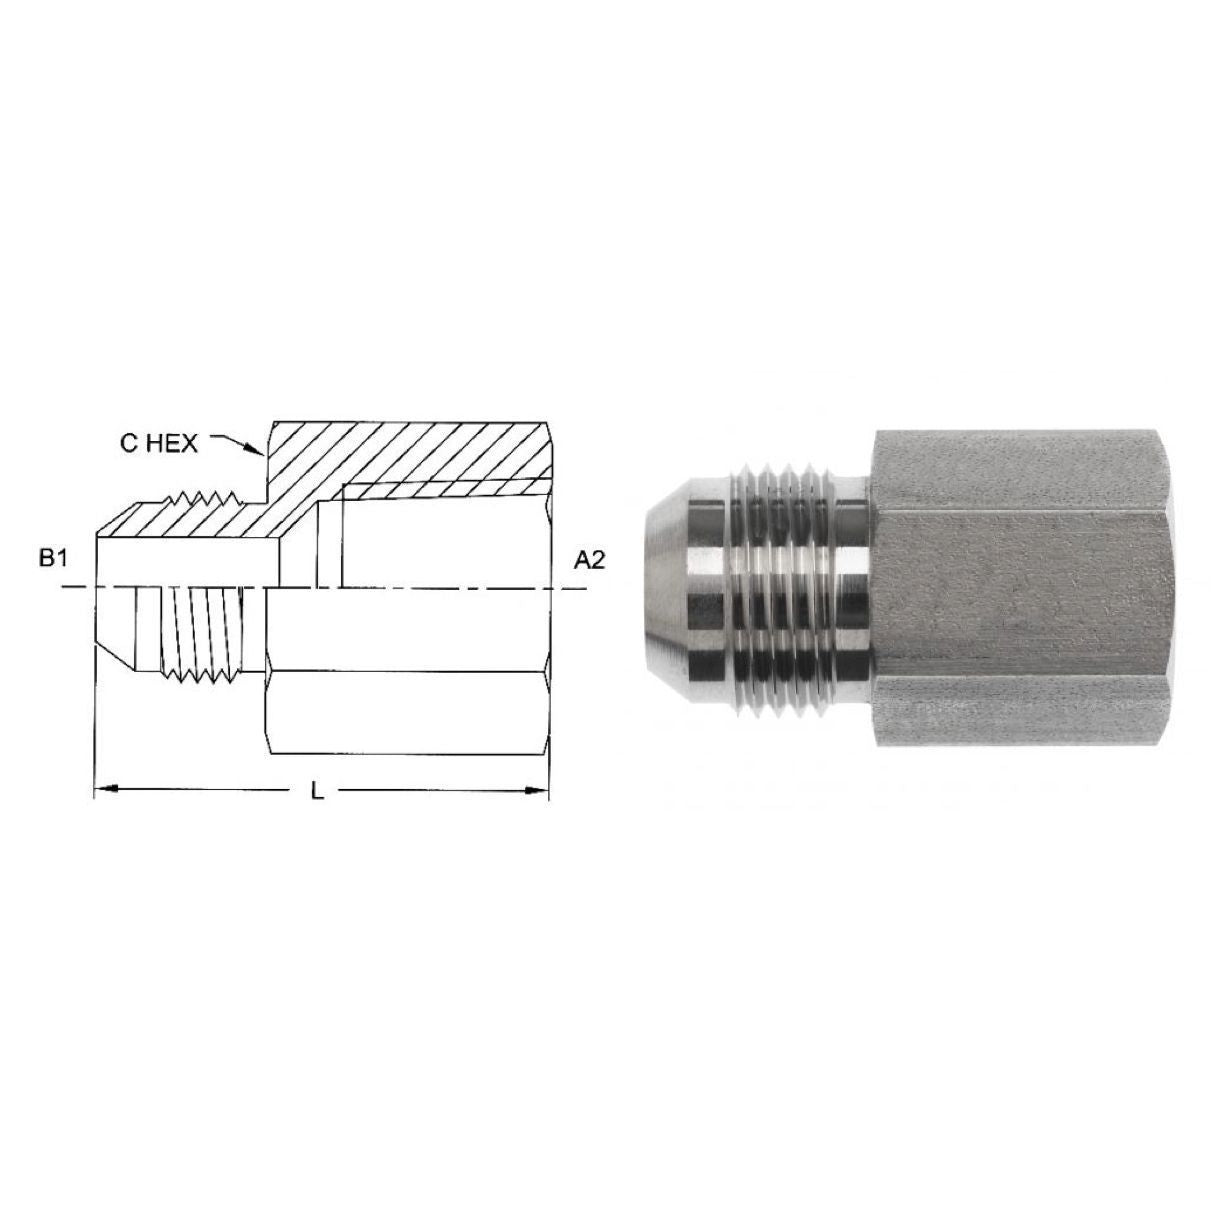 2405-14-08 : OneHydraulics  Adapter, Straight, 0.875 (7/8") Male NPT x 0.5 (1/2") Female, Steel, 5000psi